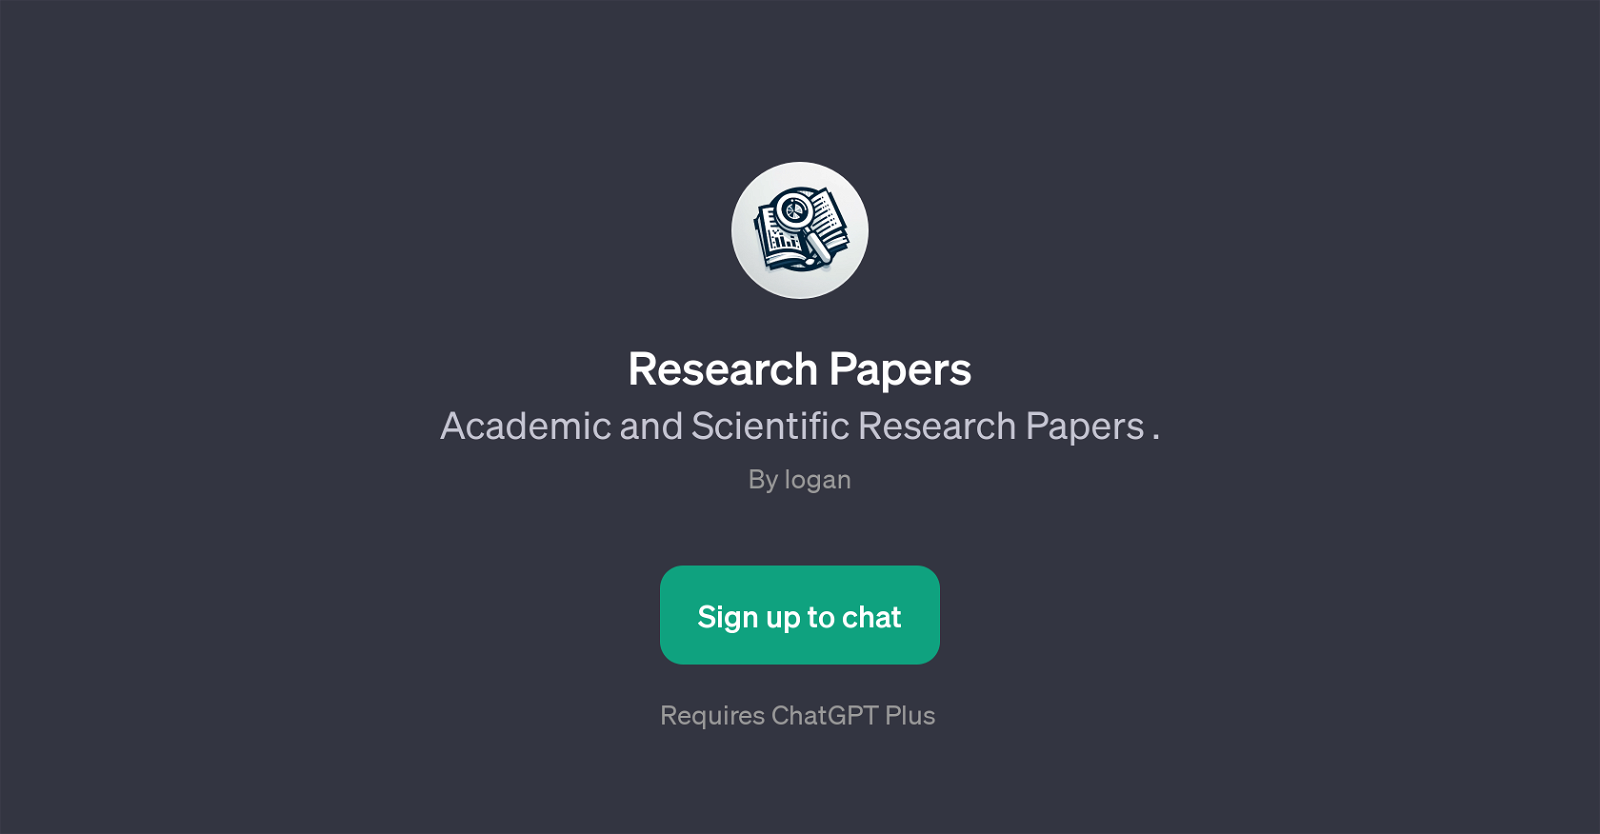 Research Papers website